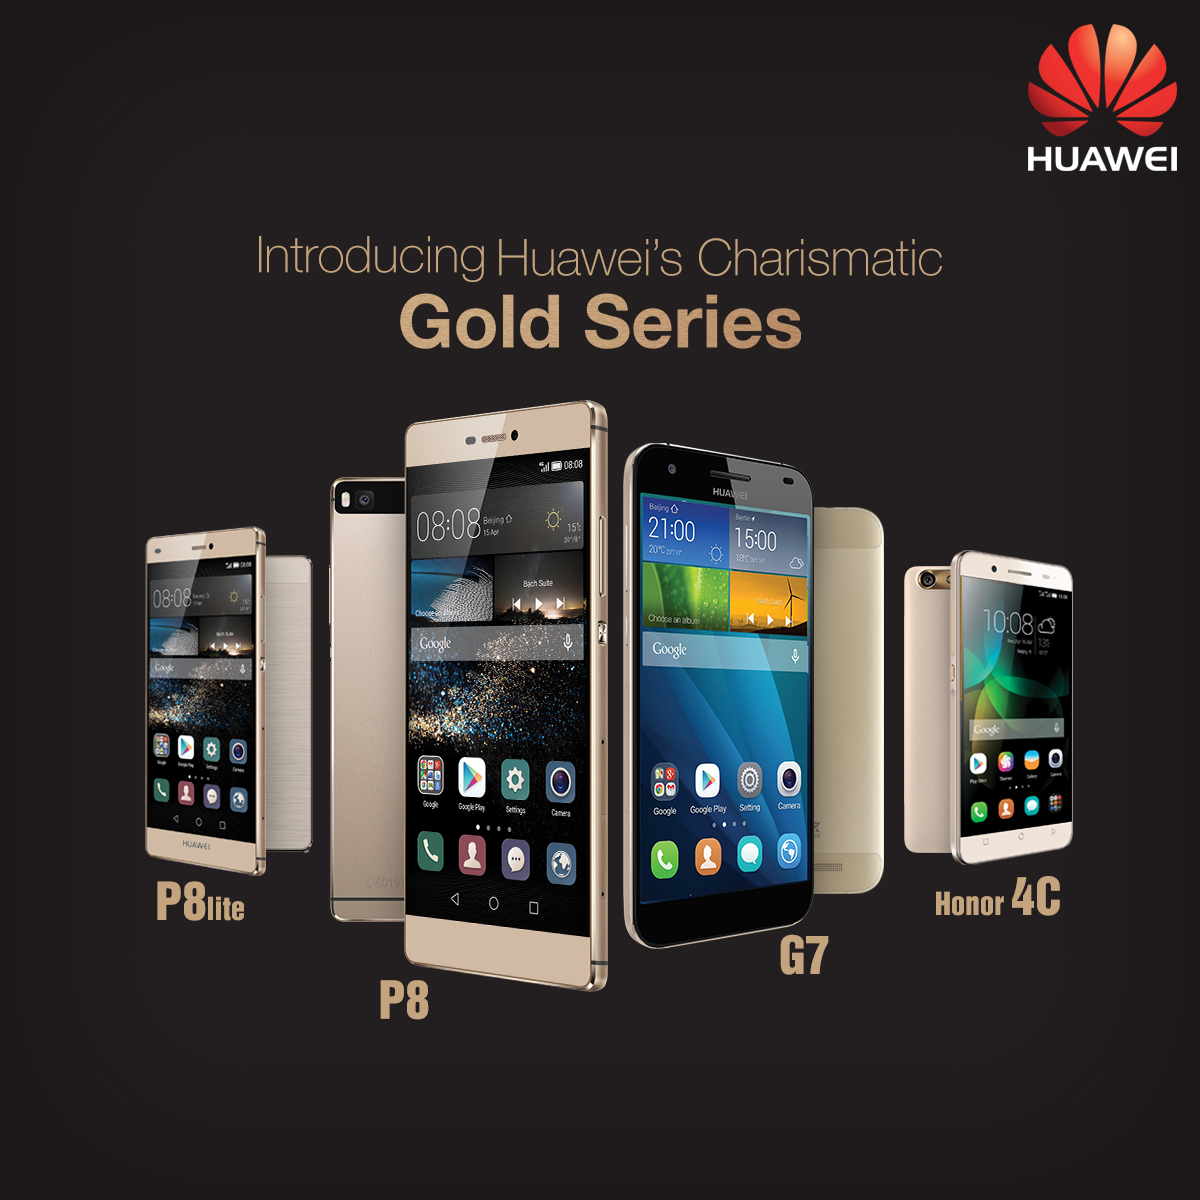 Huawei P8, P8 Lite, Honor 4C and G7 available in Gold versions